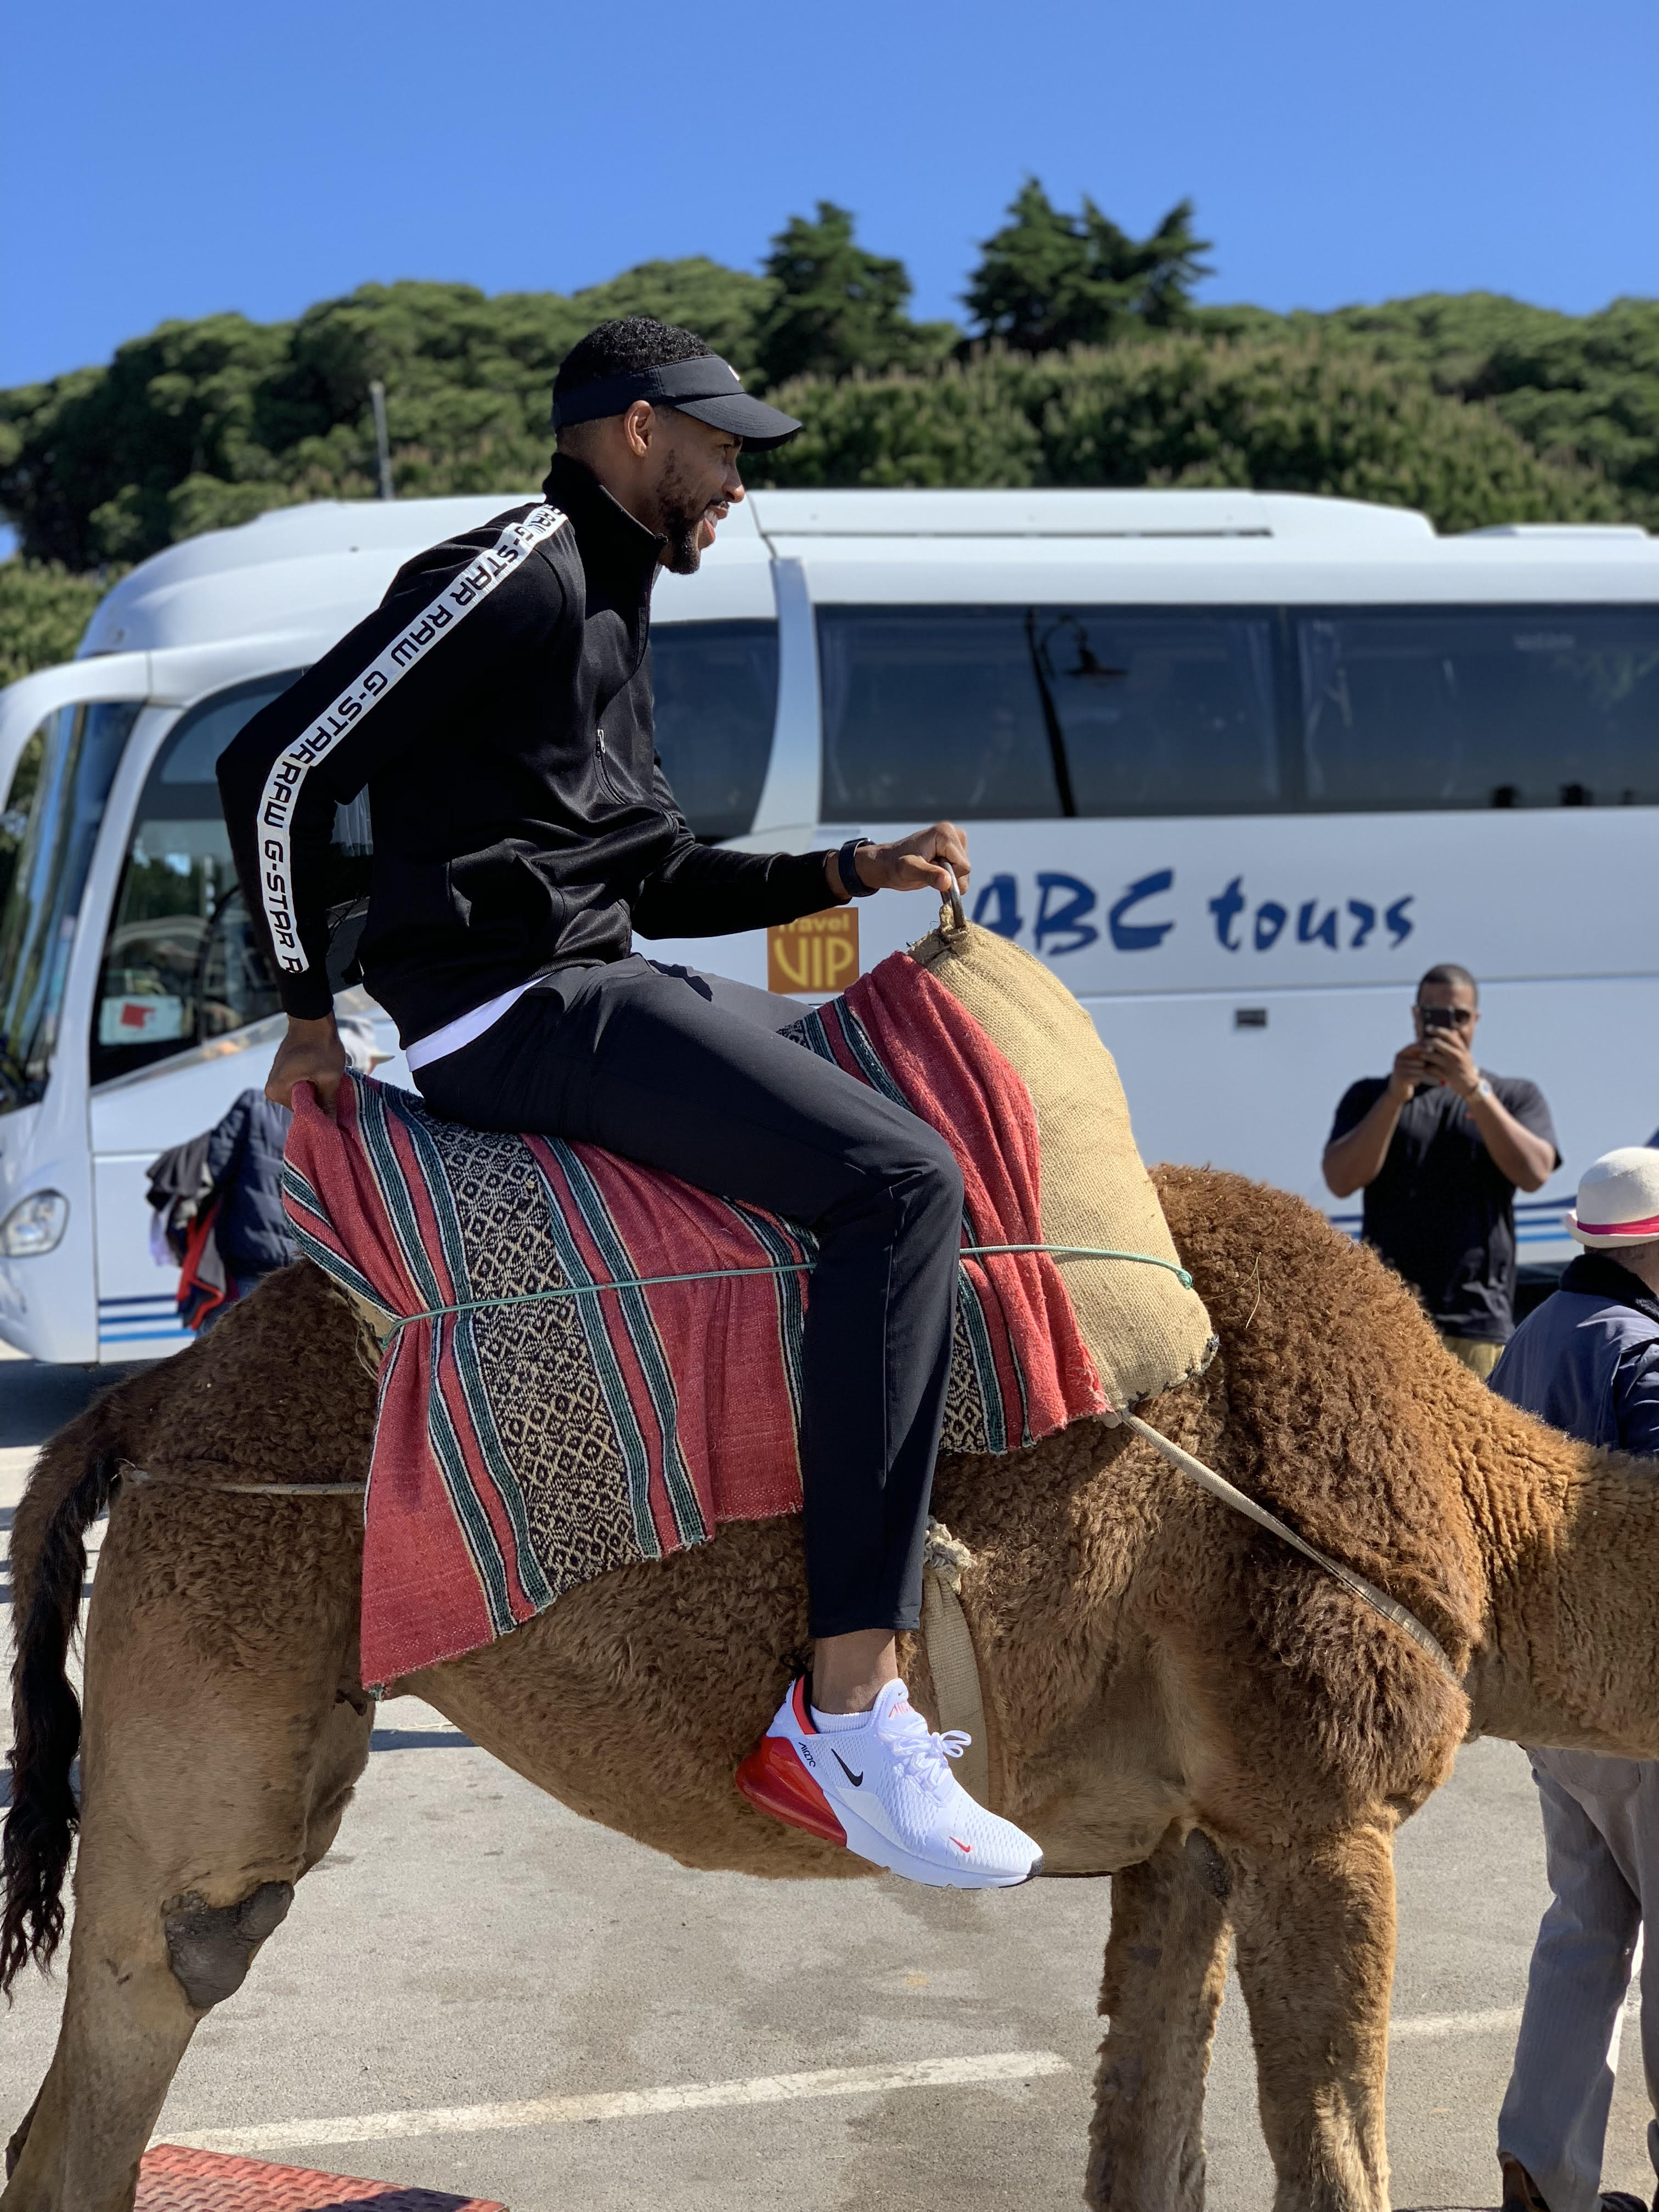 NBA basketball star Garrett Temple taking a break from golf in Spain with a trip to Morocco.